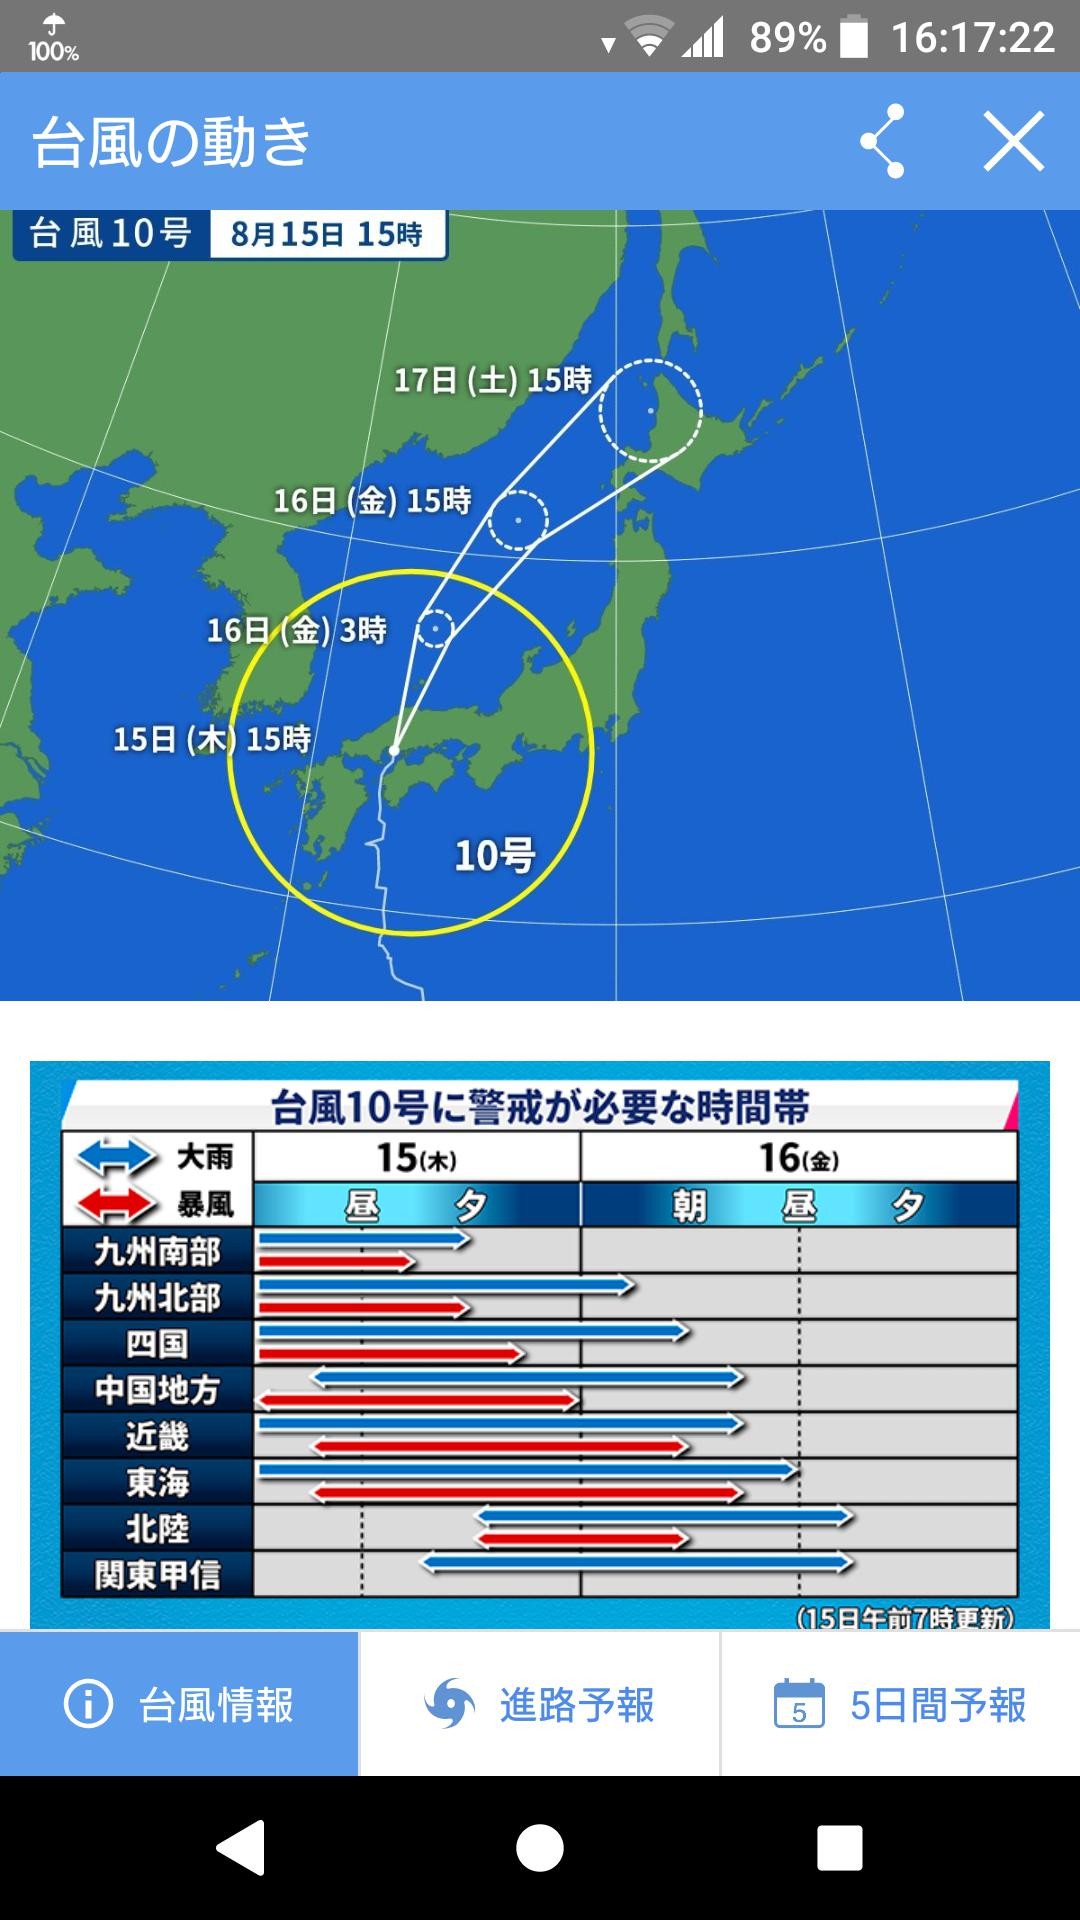 [Breaking news] Typhoon No. 10 that had been overwhelmed so much, the Kure landing exhausted and the storm area disappeared